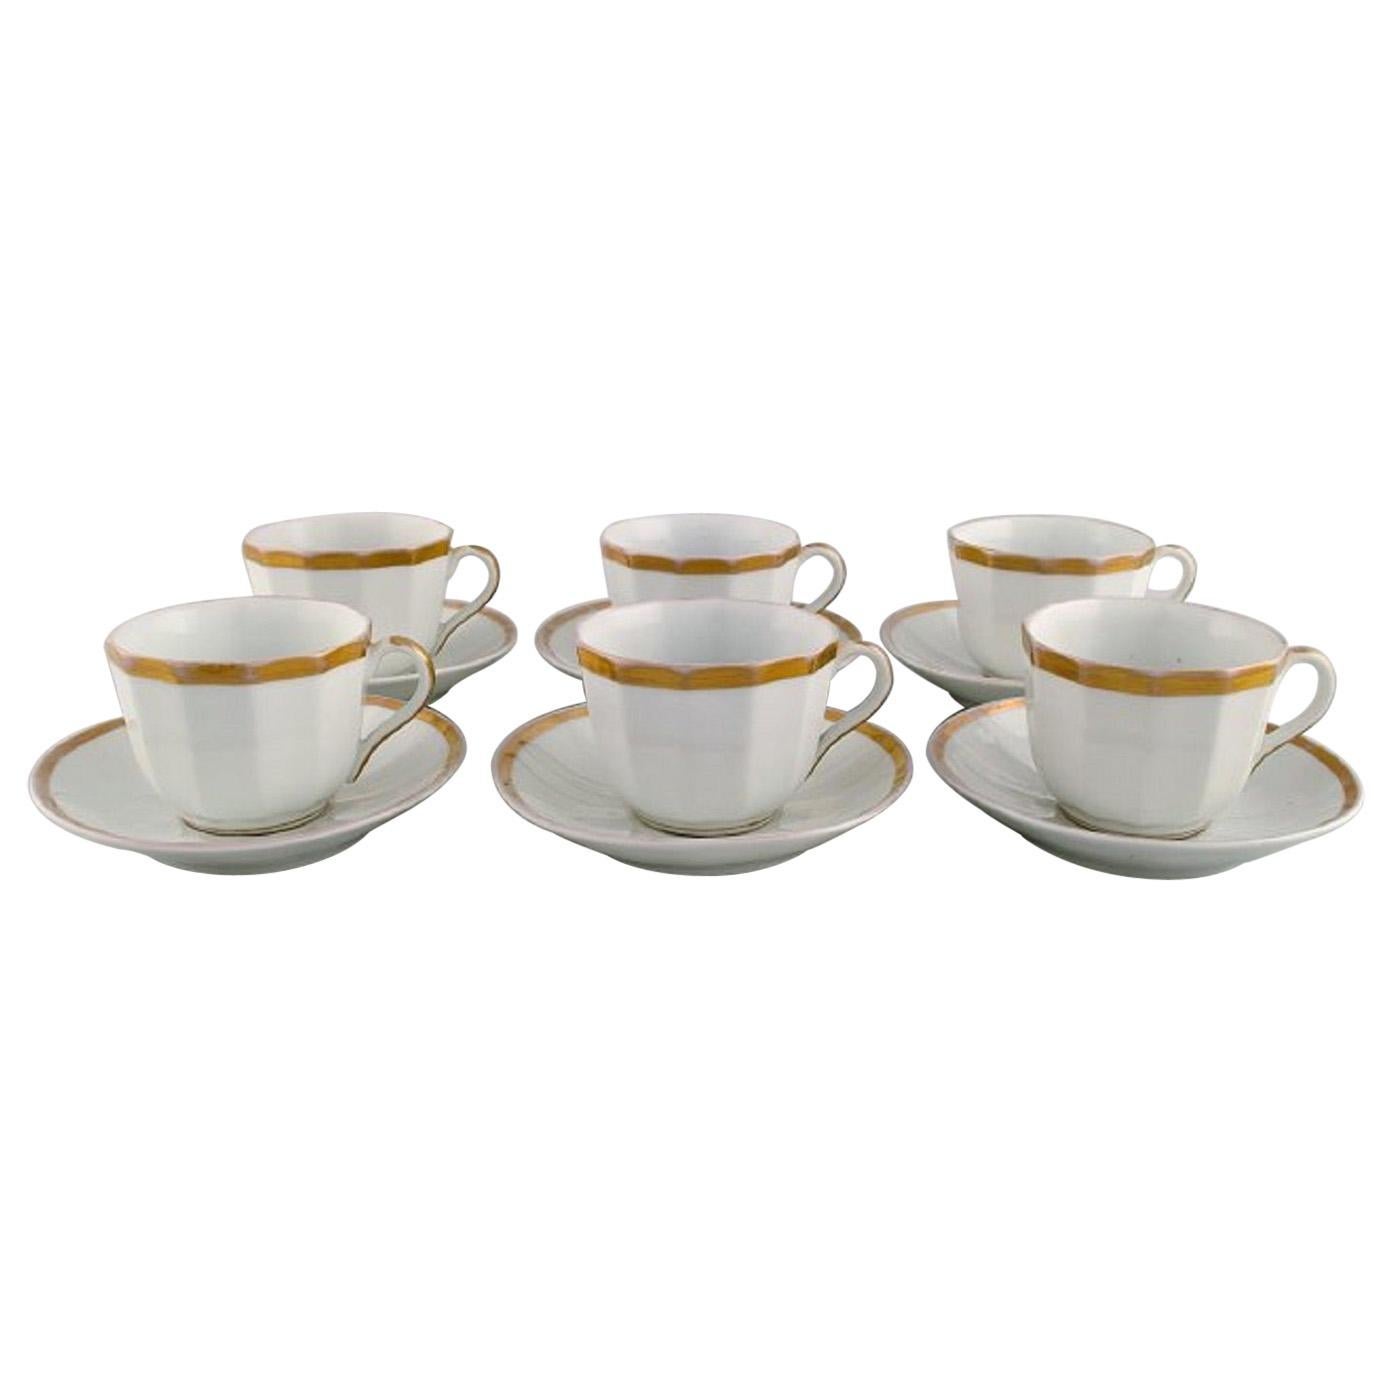 Six Antique Bing & Grøndahl Coffee Cups with Saucers, 1870s For Sale